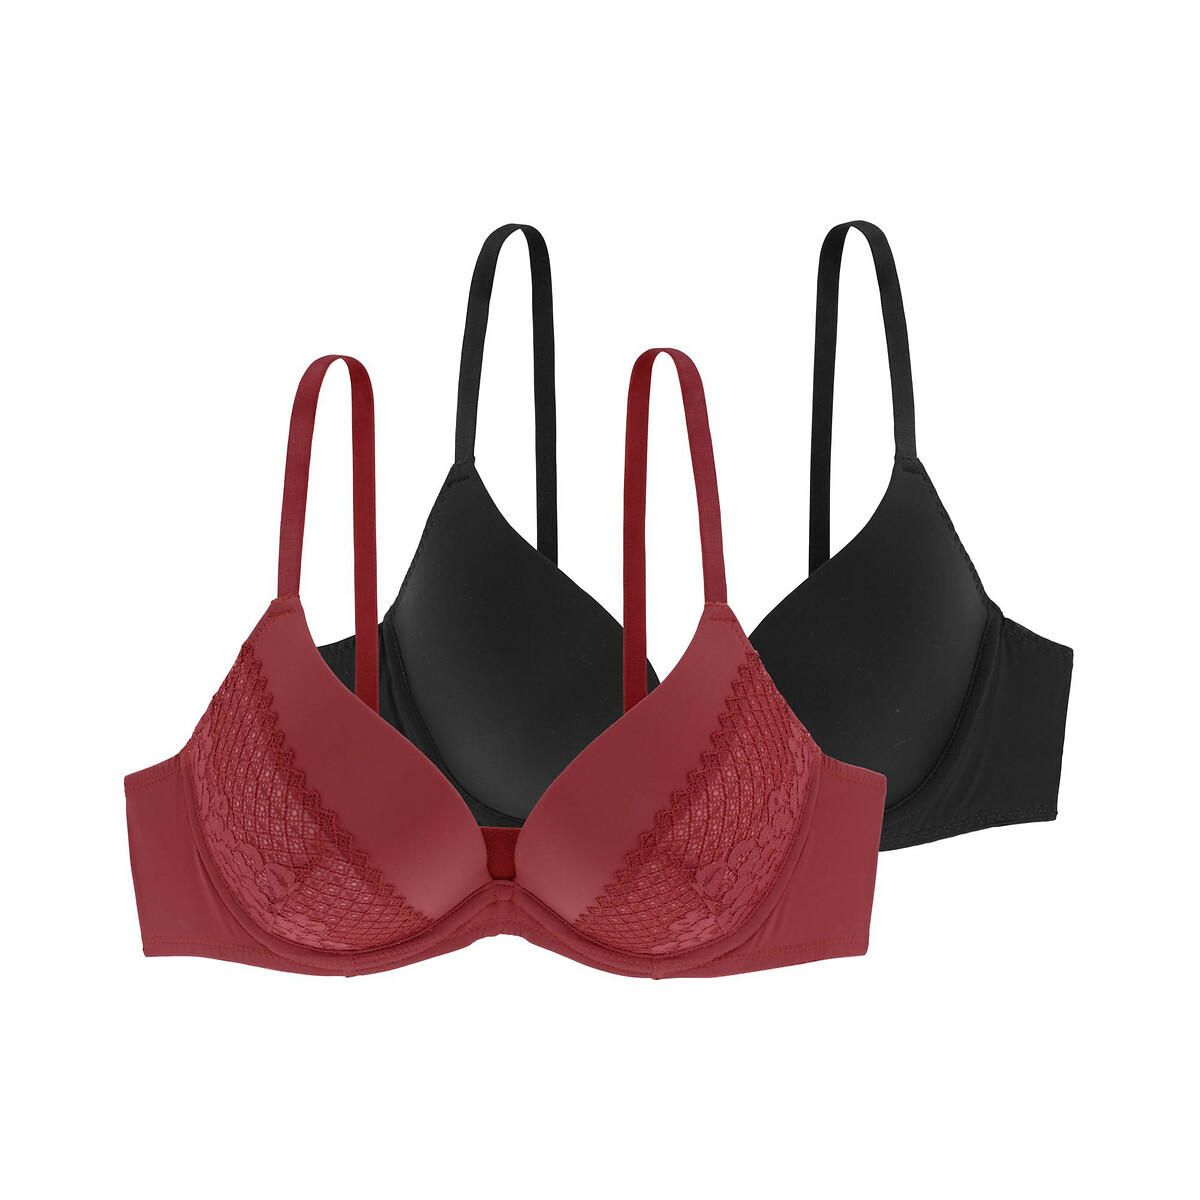 Pack of 2 kelsea recycled underwired bras red/black Dorina